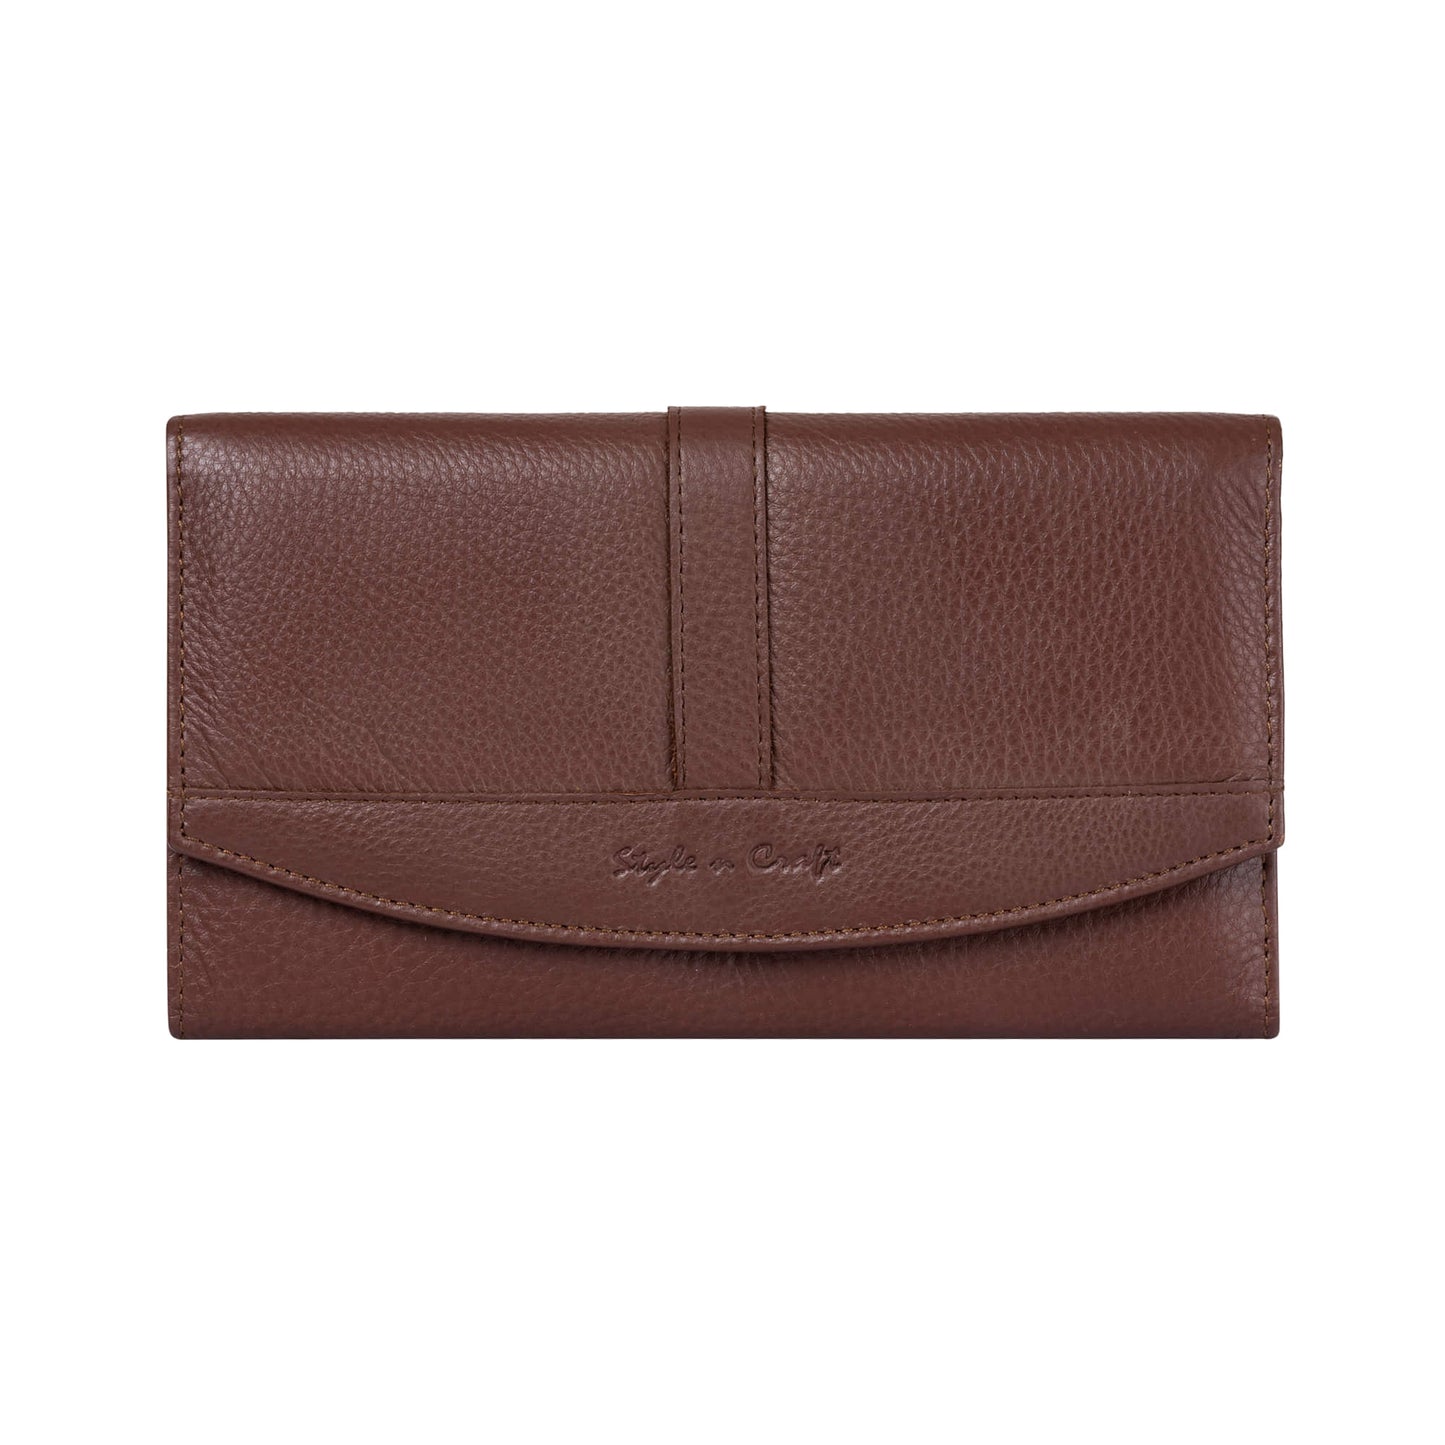 Style n Craft 391105 Double Fold Ladies Long Clutch Wallet in High Grade Brown Full Grain Leather - Front View - Closed